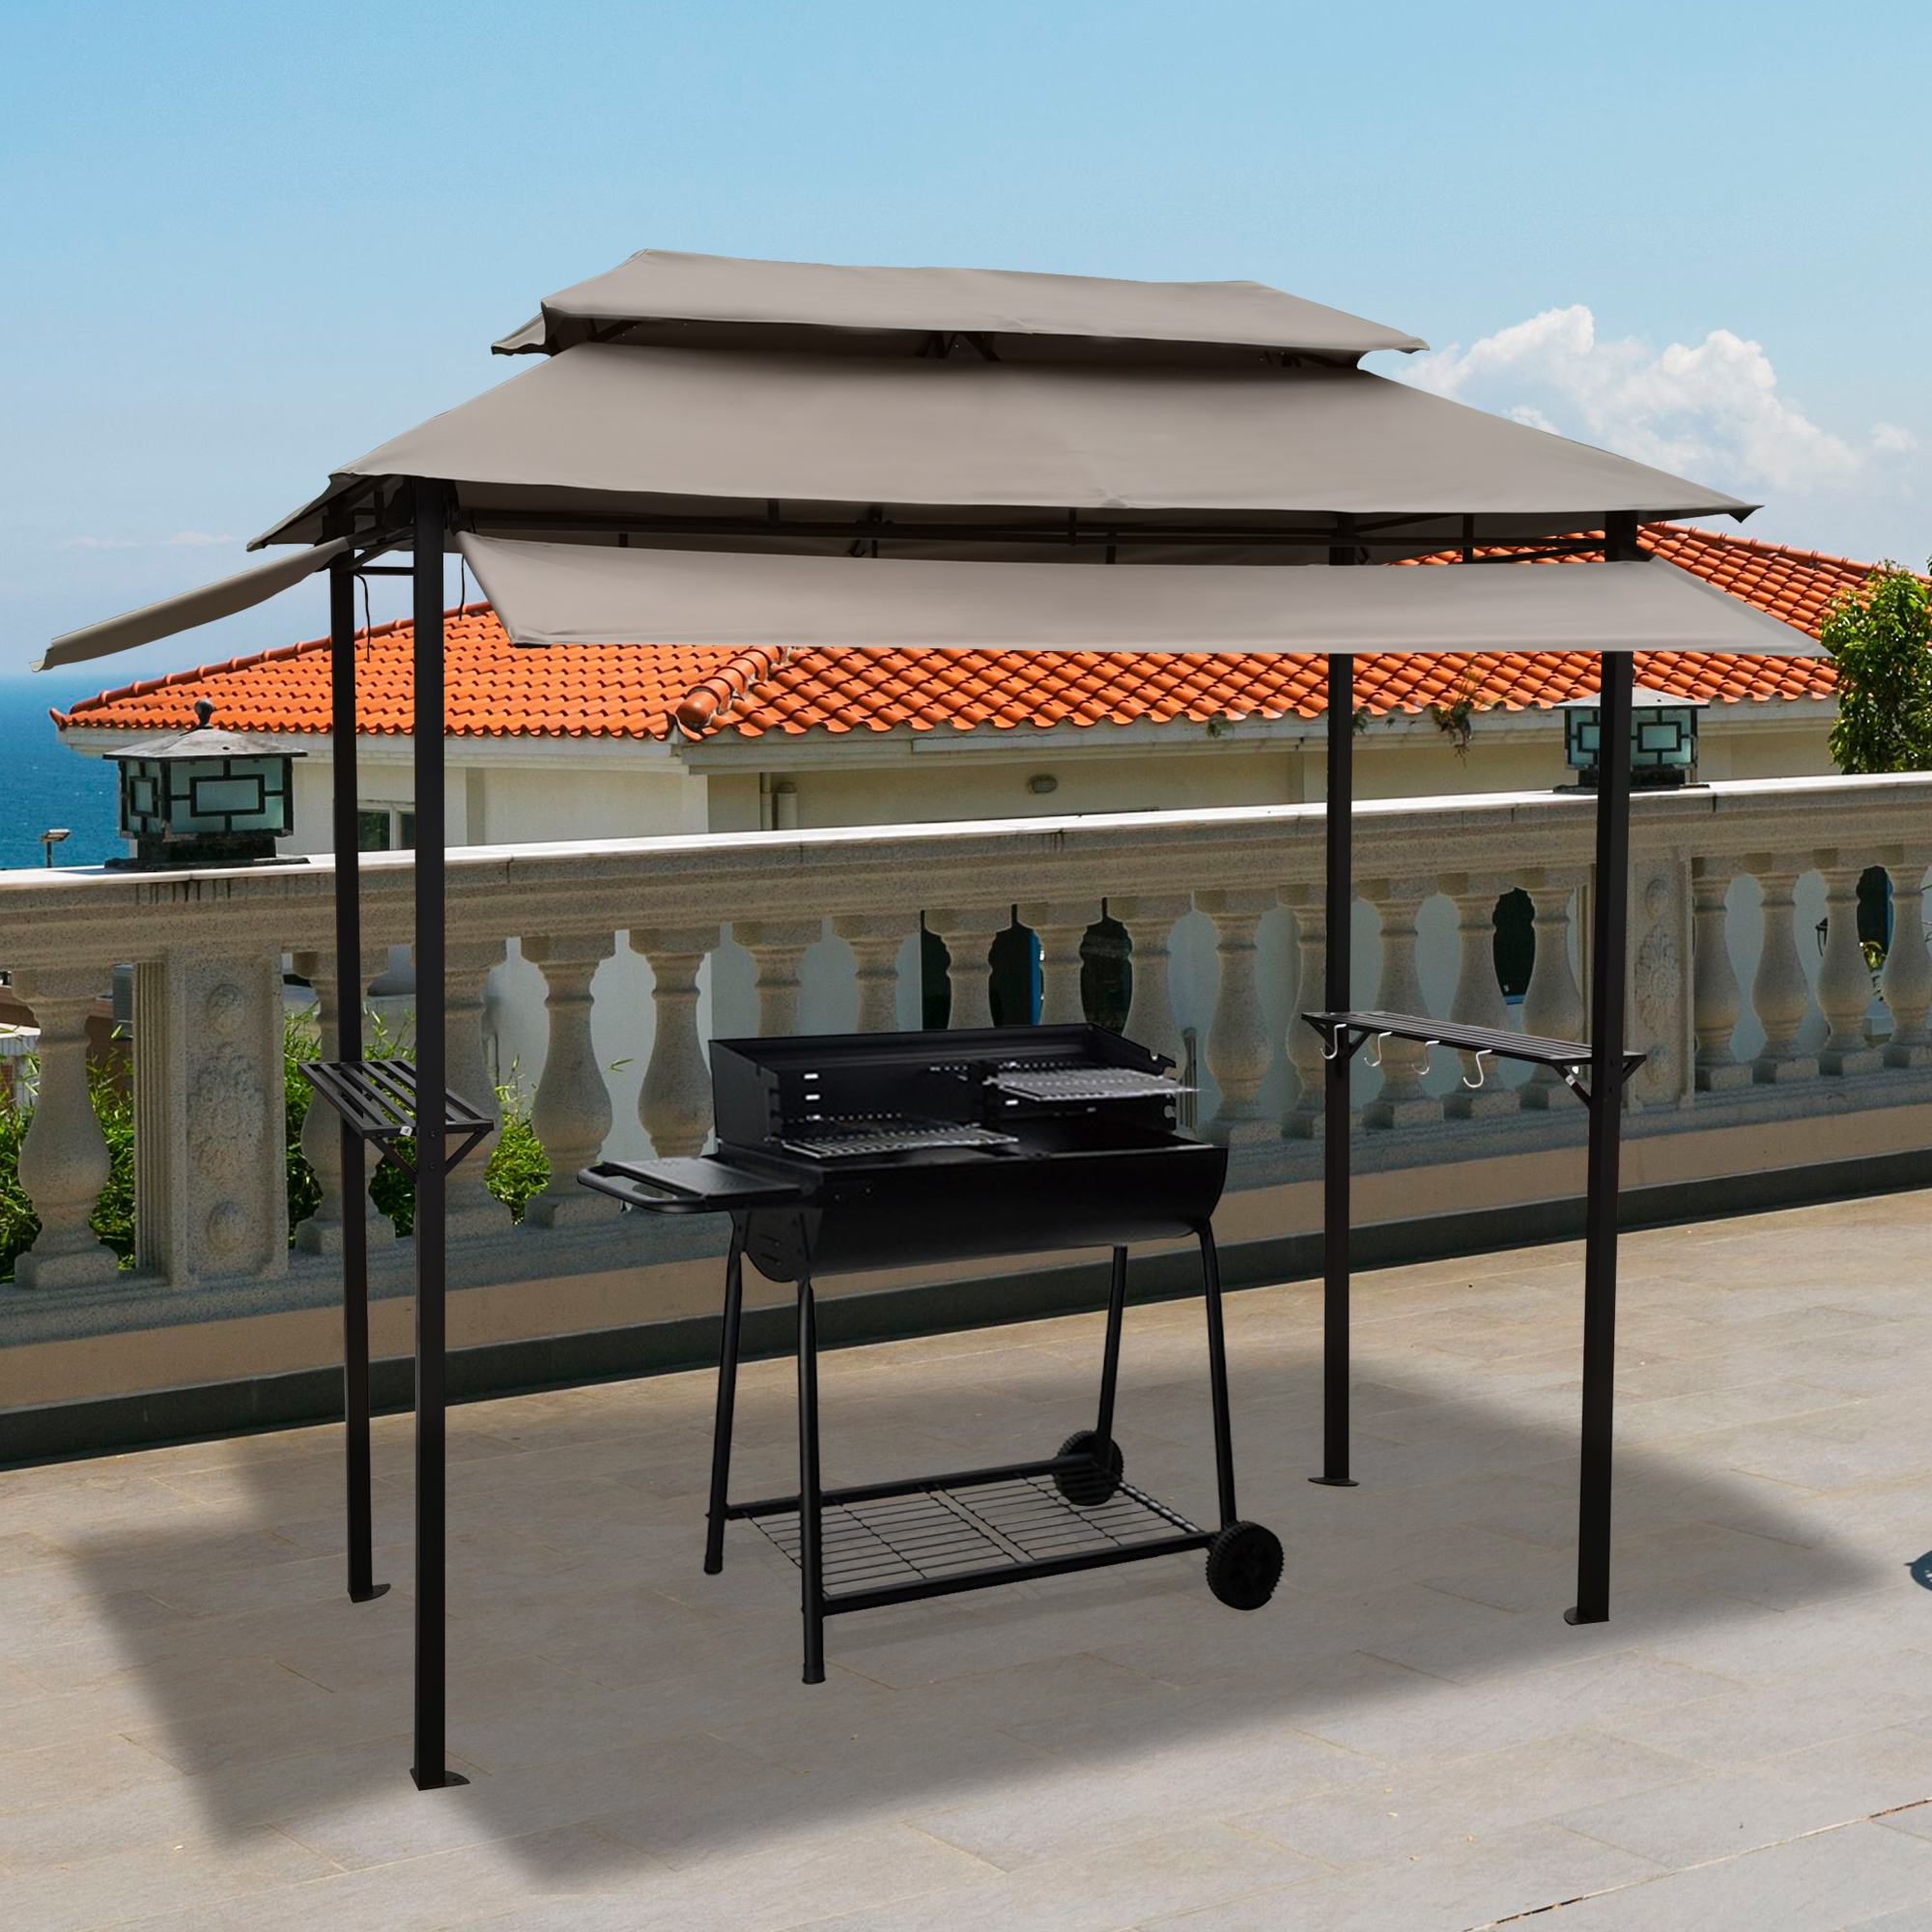 8x4ft Grill Gazebo,metal gazebo with Soft Top Canopy and Steel Frame with hook and Bar Counters,Mushroom fabric